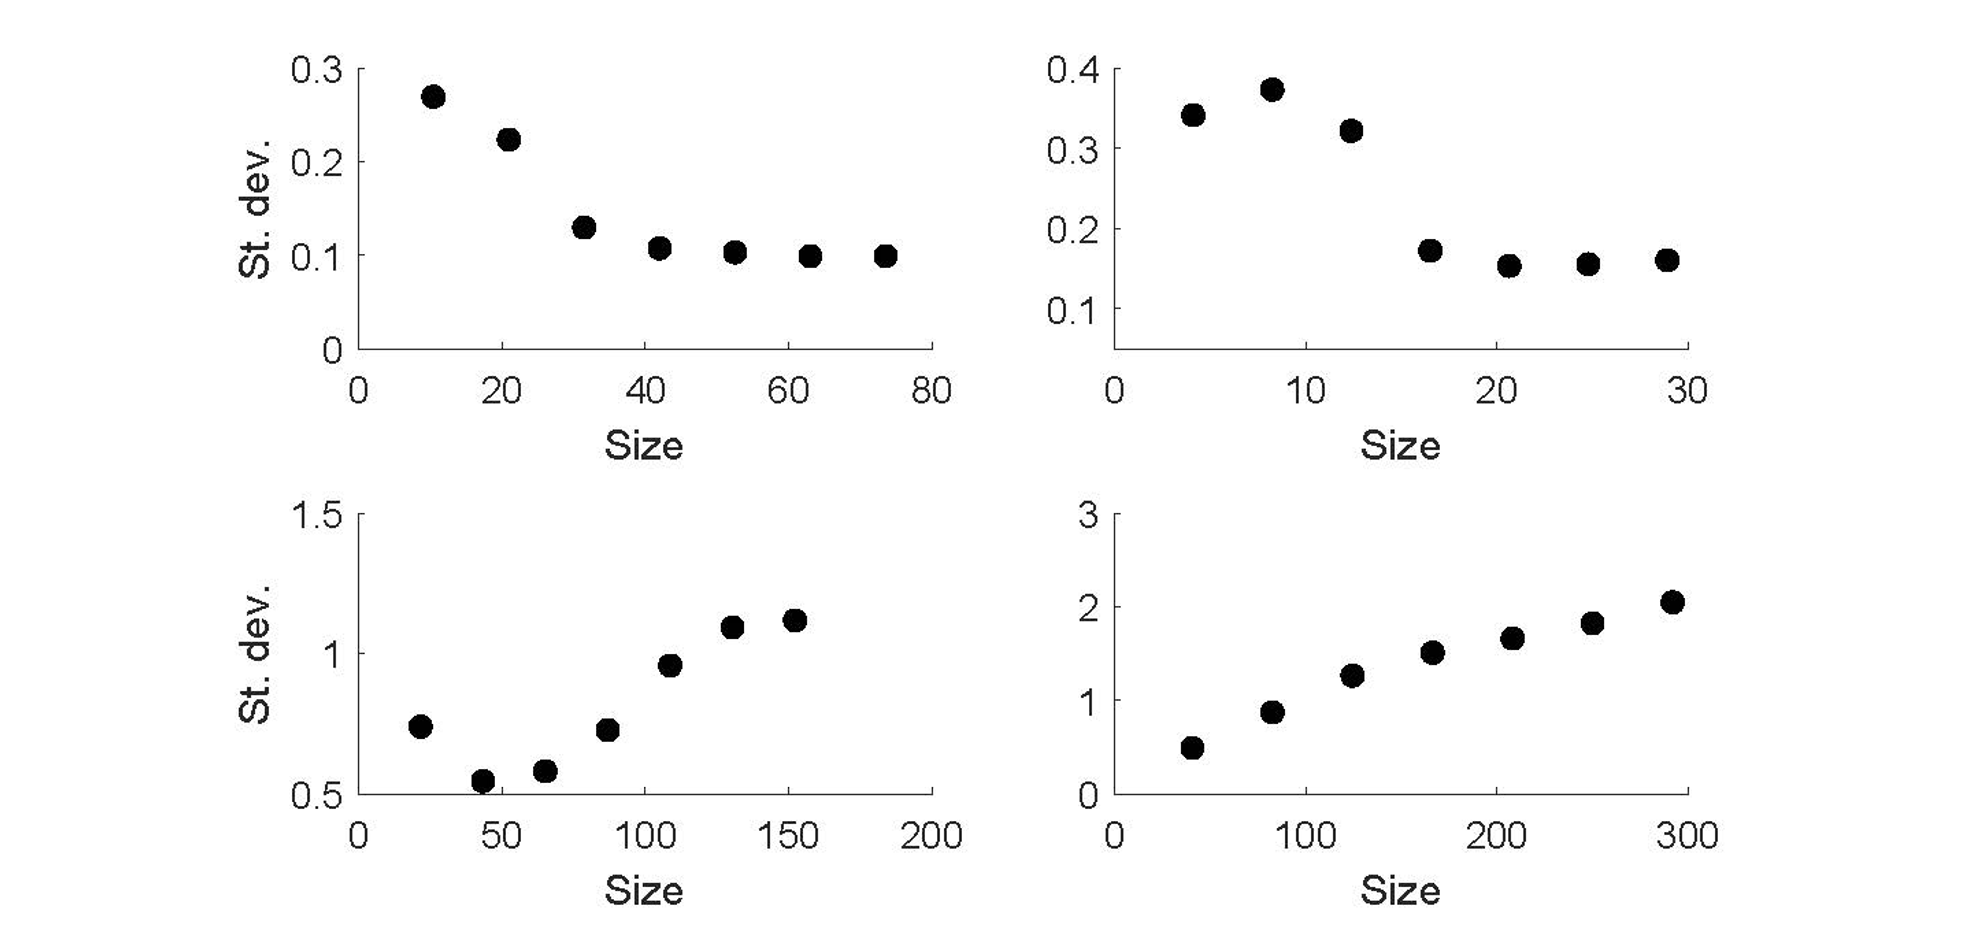 Figure 4 Size versus standard deviation of sales for all firms as generated by the model simulations